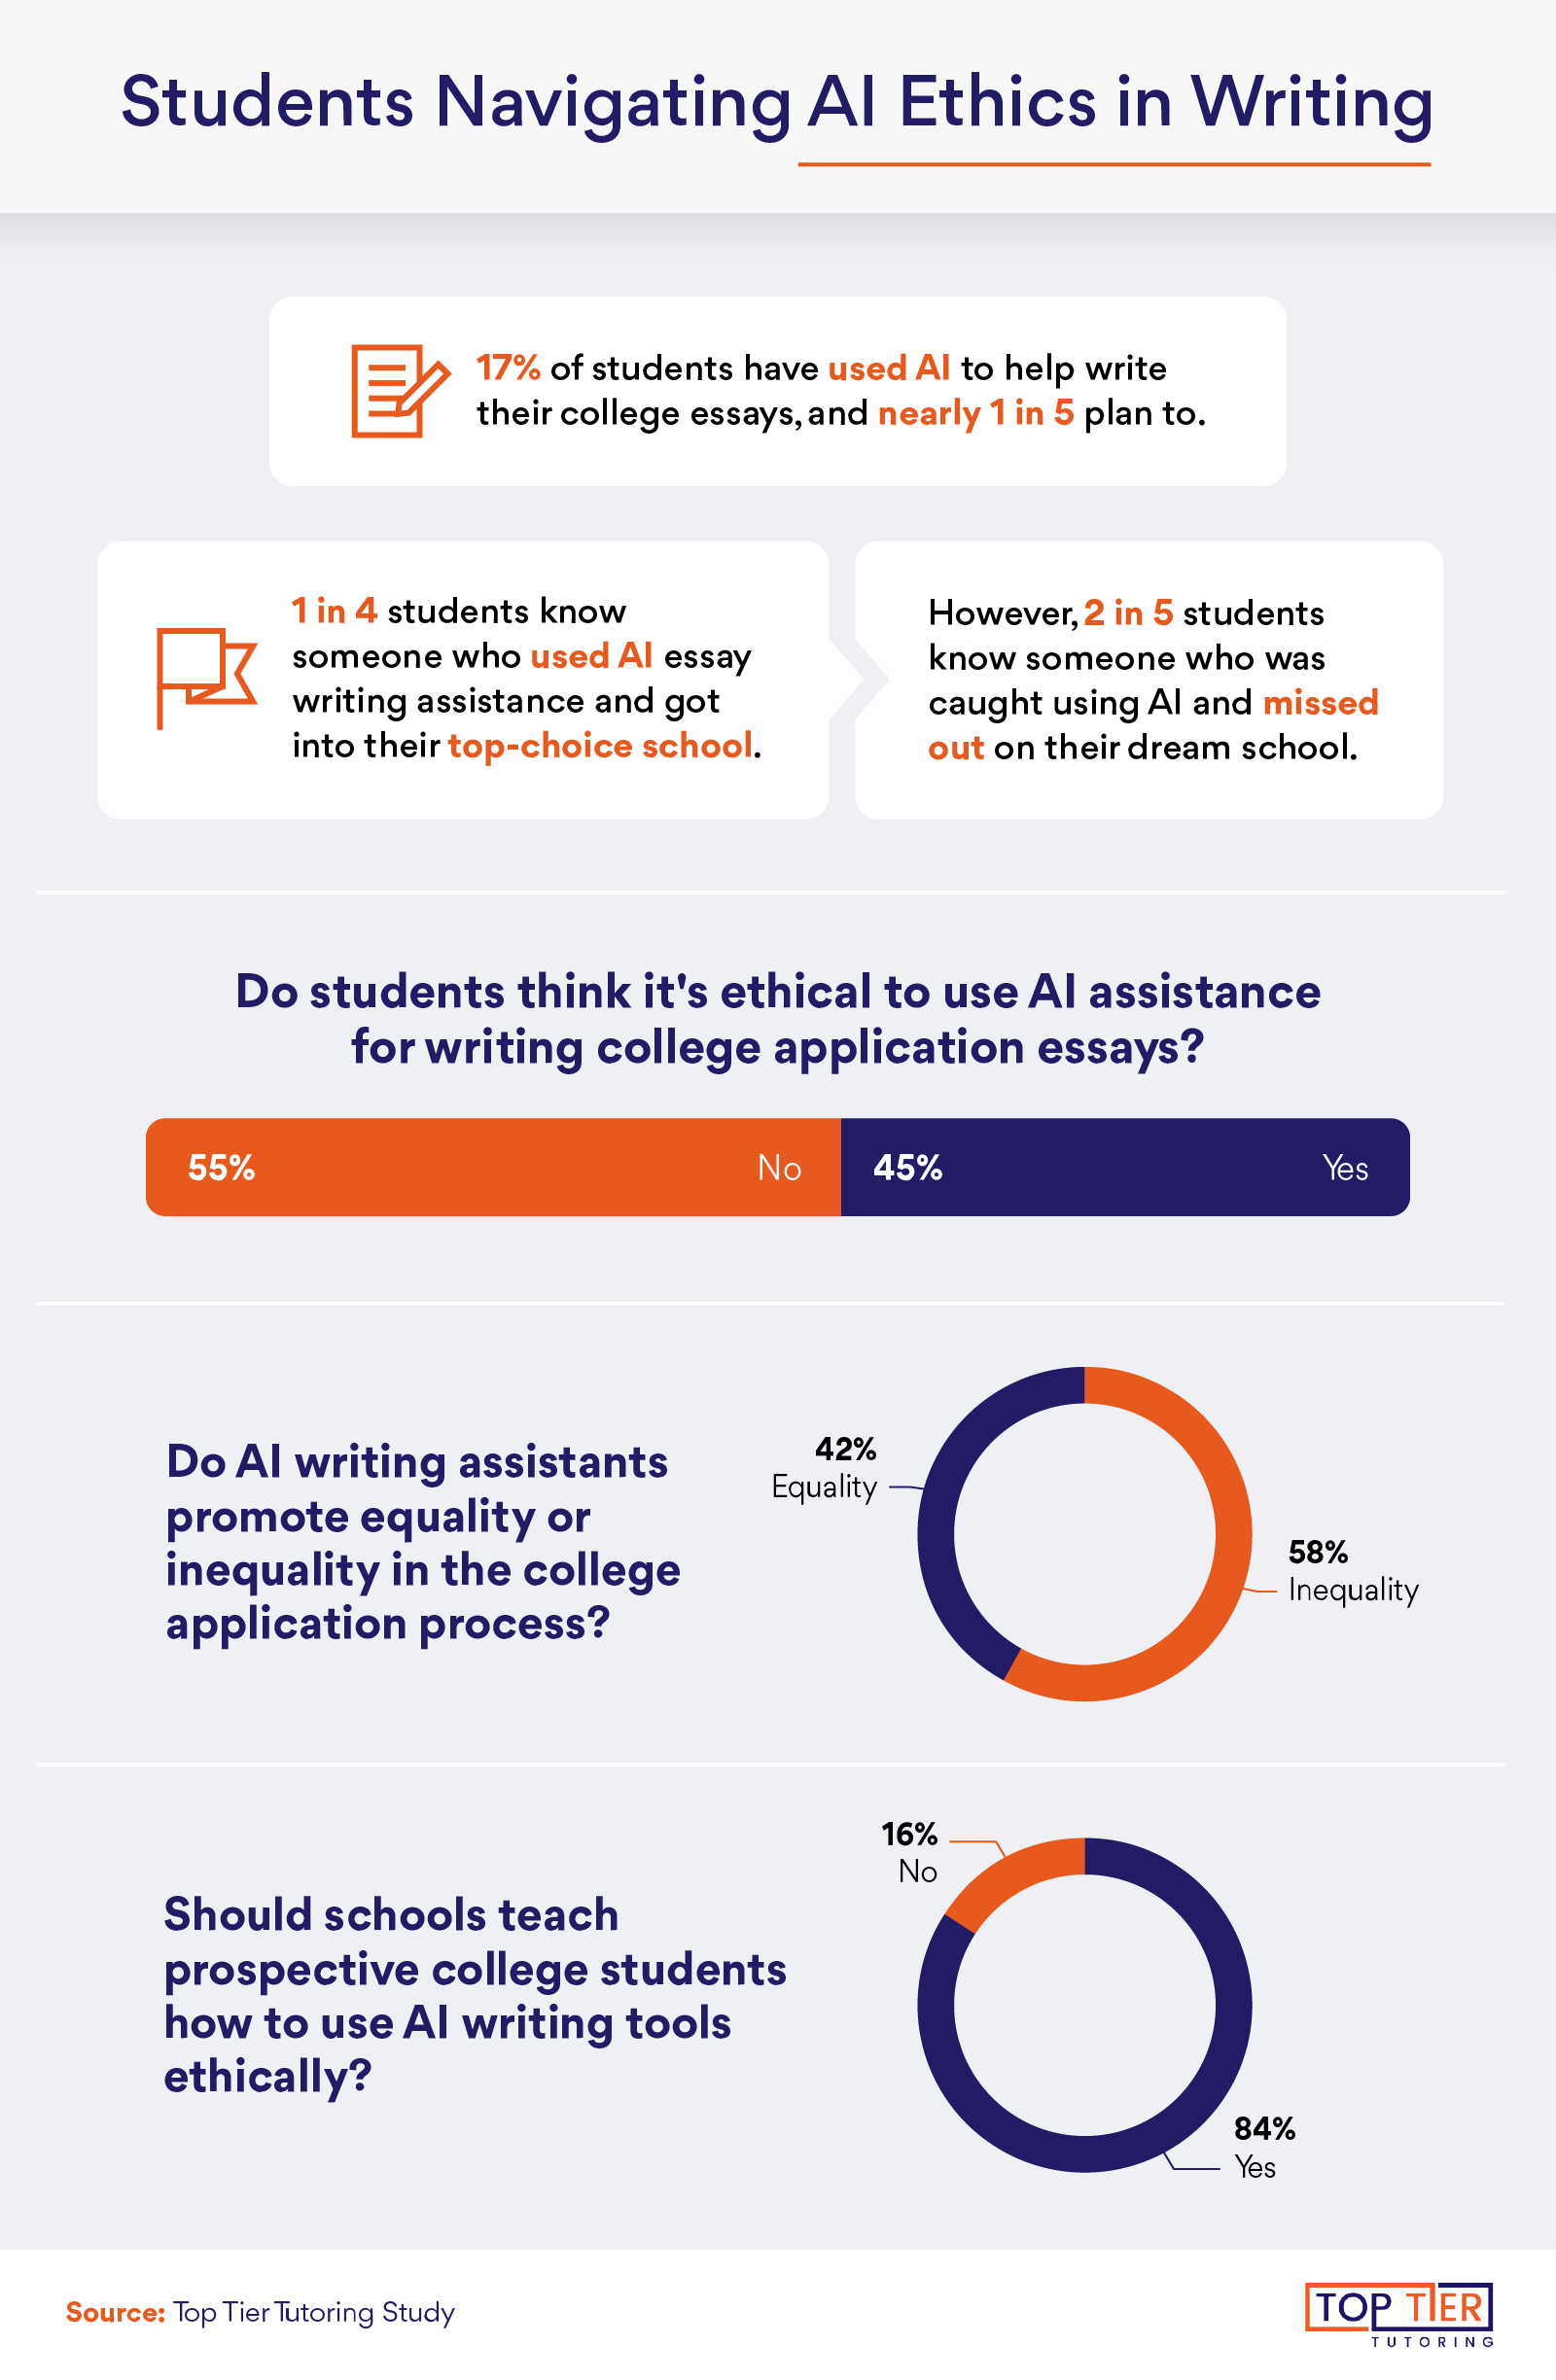 This image explores students perspectives about using AI for college admissions assistance. 